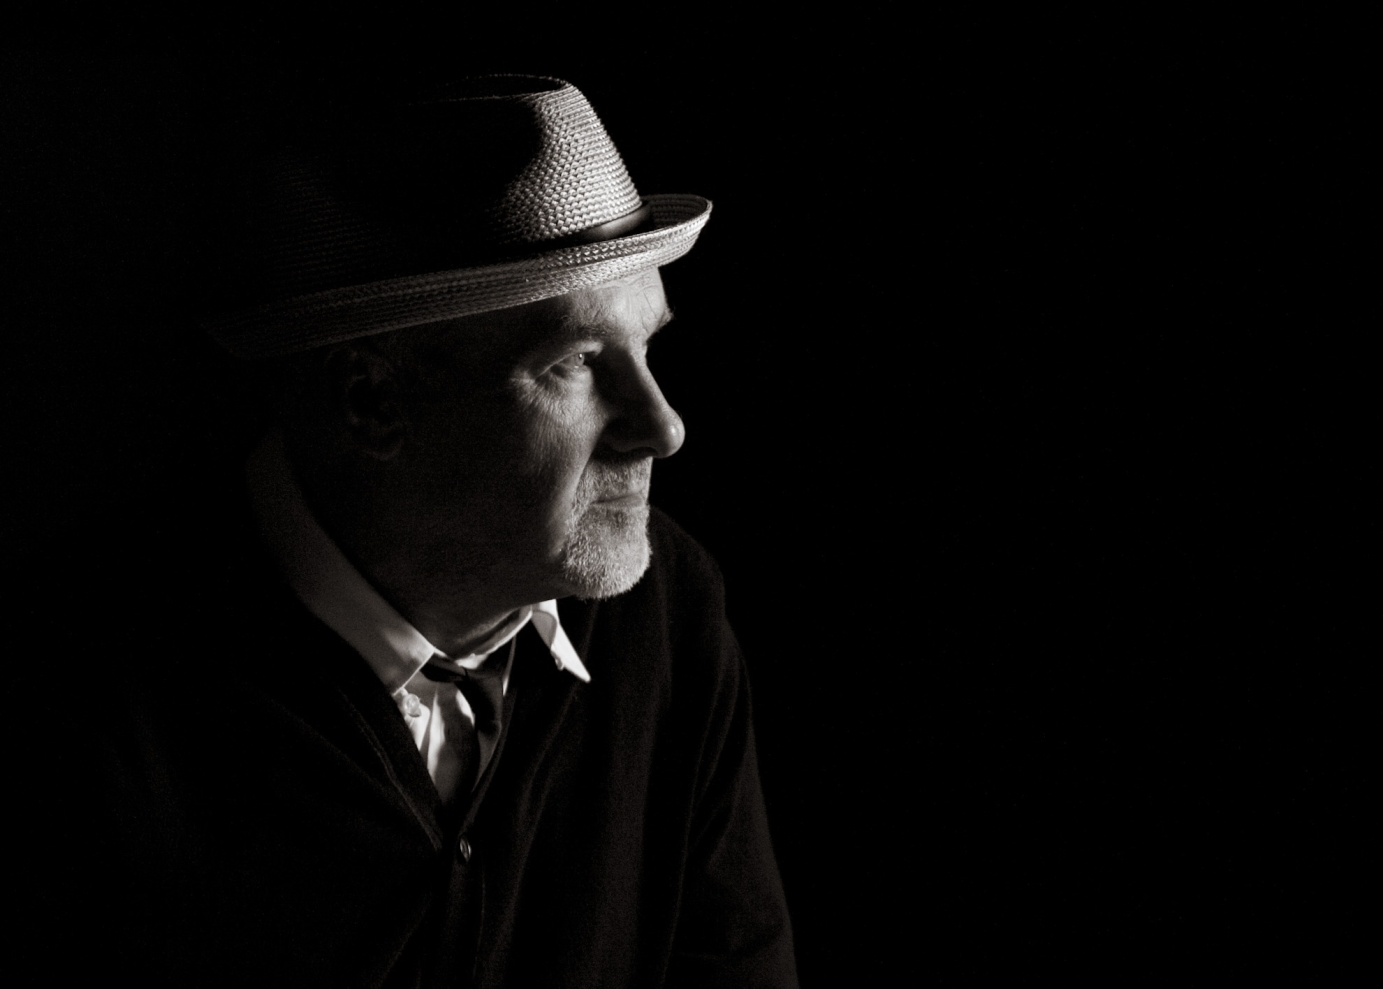 Photography for Paul Carrack by Gun Hill Studios